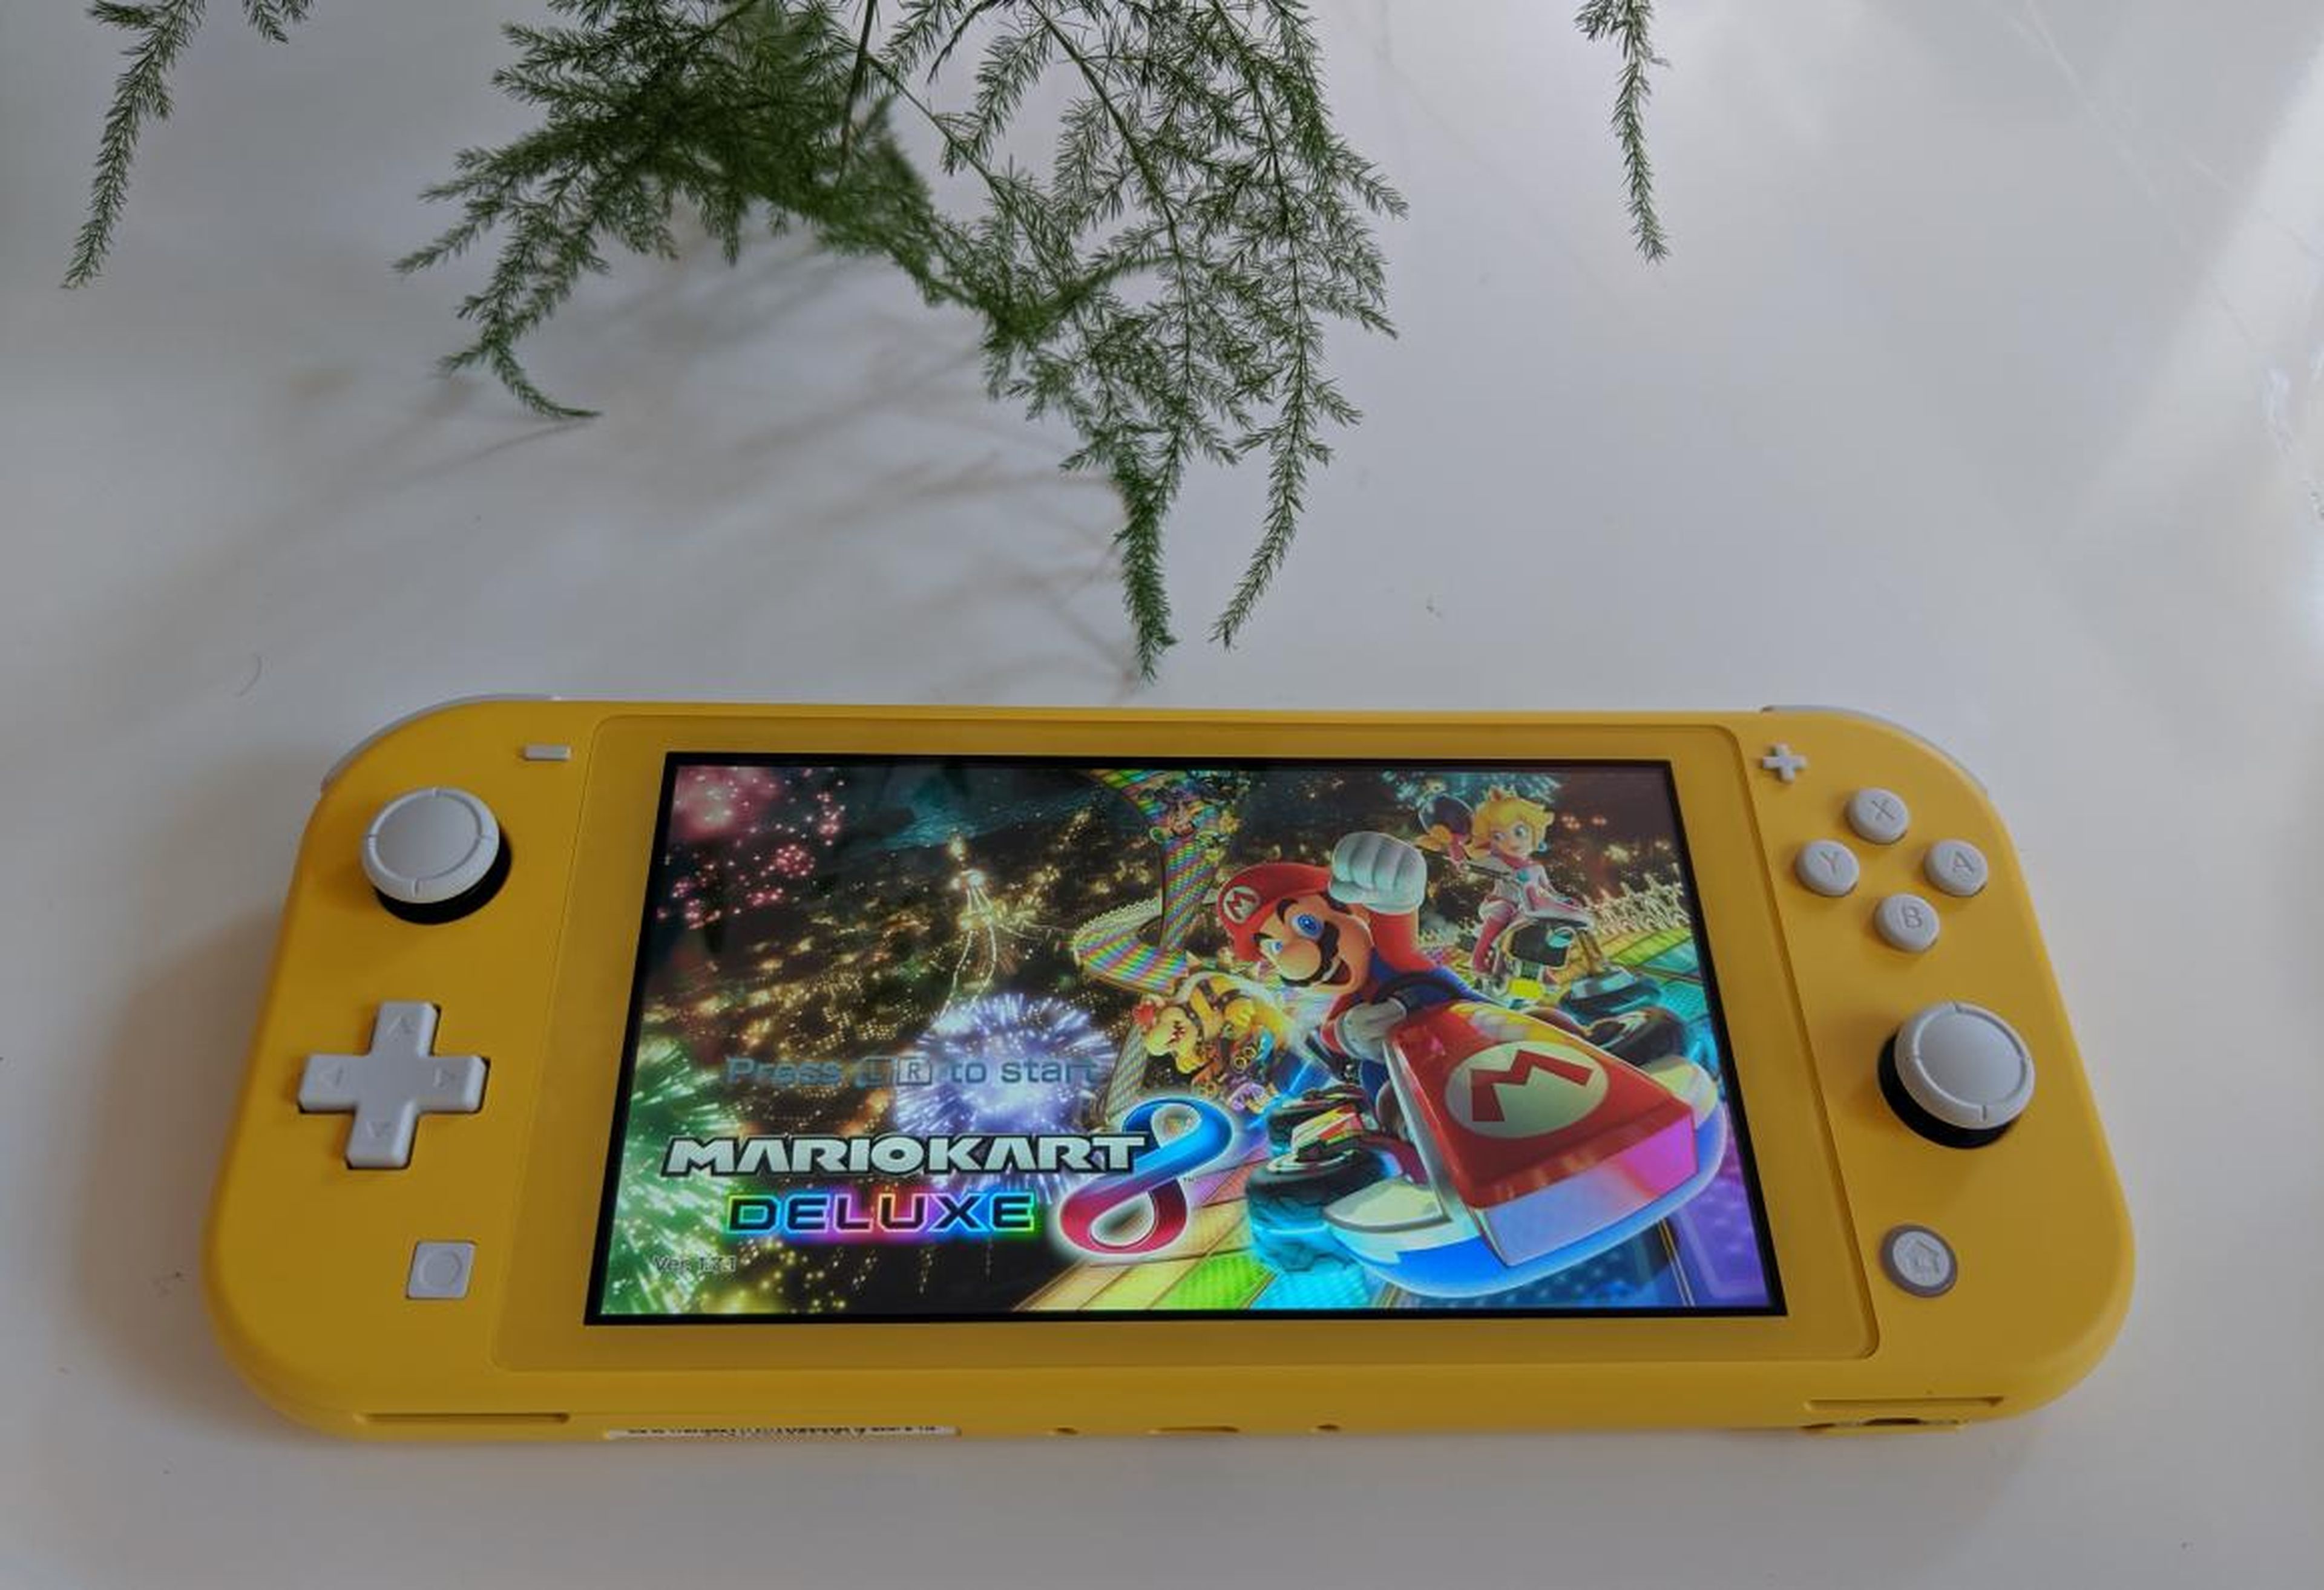 The Switch Lite feels noticeably lighter than the original Switch, and a bit sturdier without the detachable Joy-Cons. The software and games felt identical to the original Switch in terms of performance.